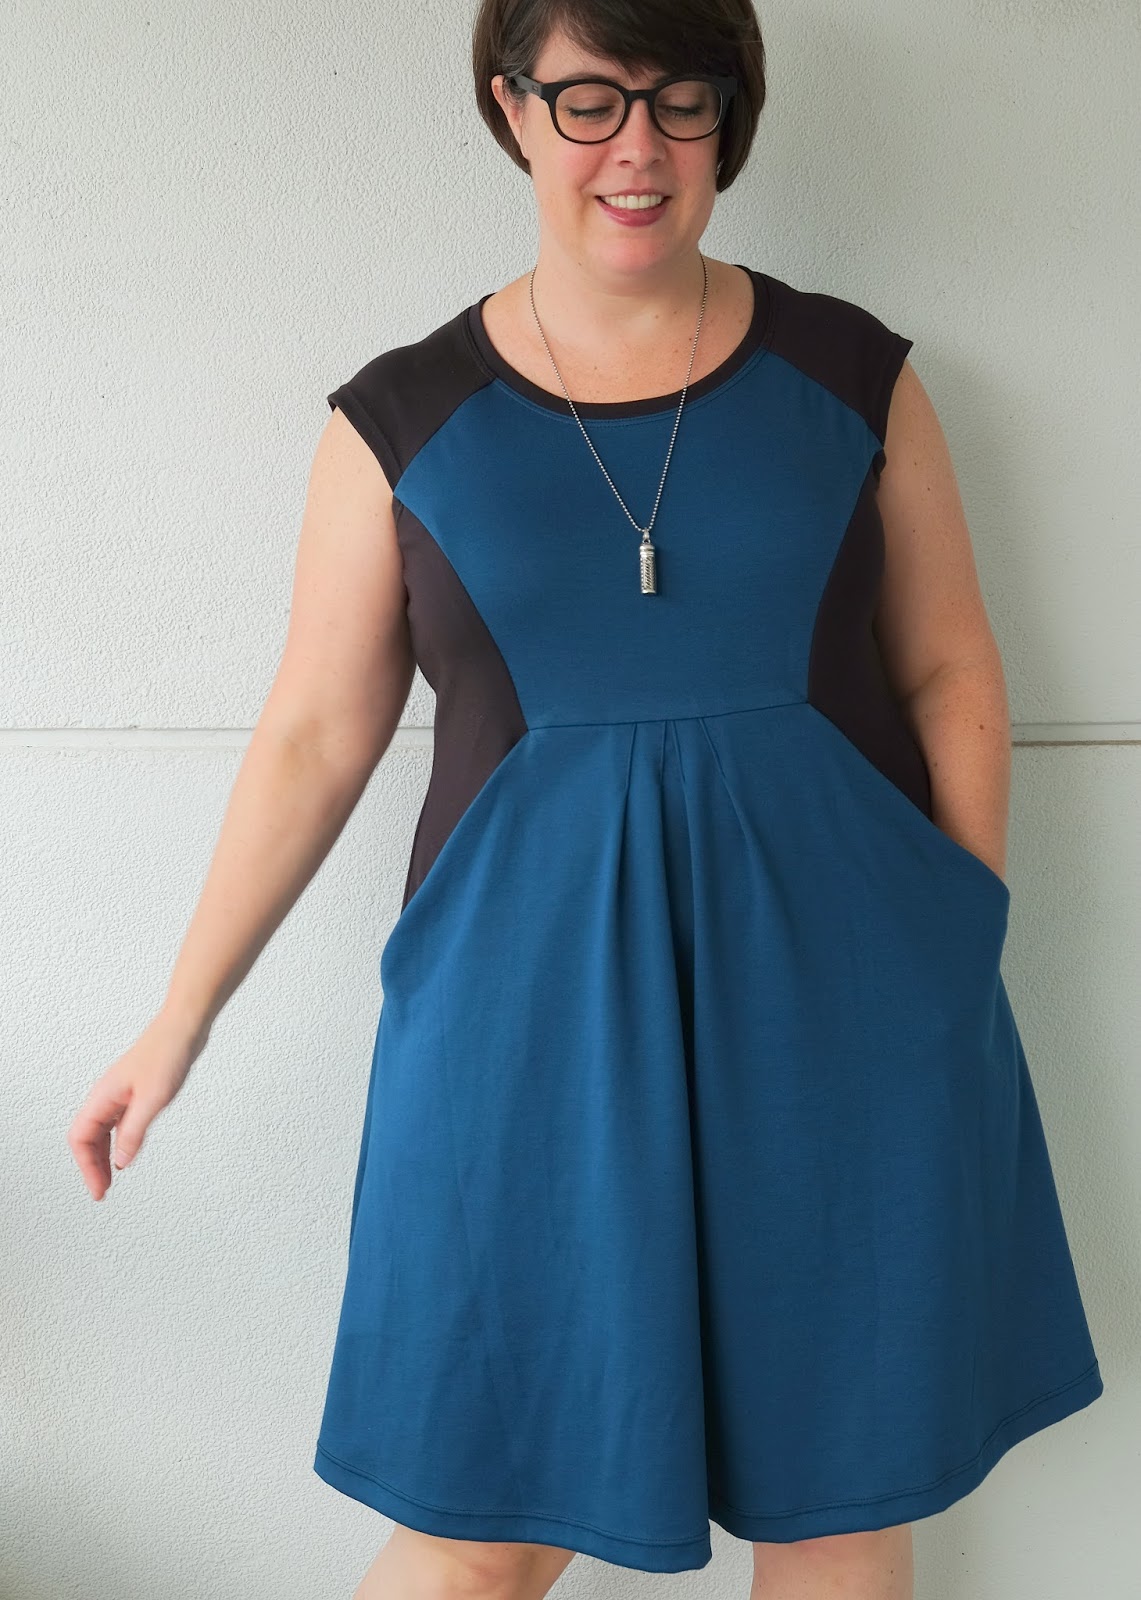 Cookin' & Craftin': Testing, testing: Tilly and the Buttons Zadie Dress